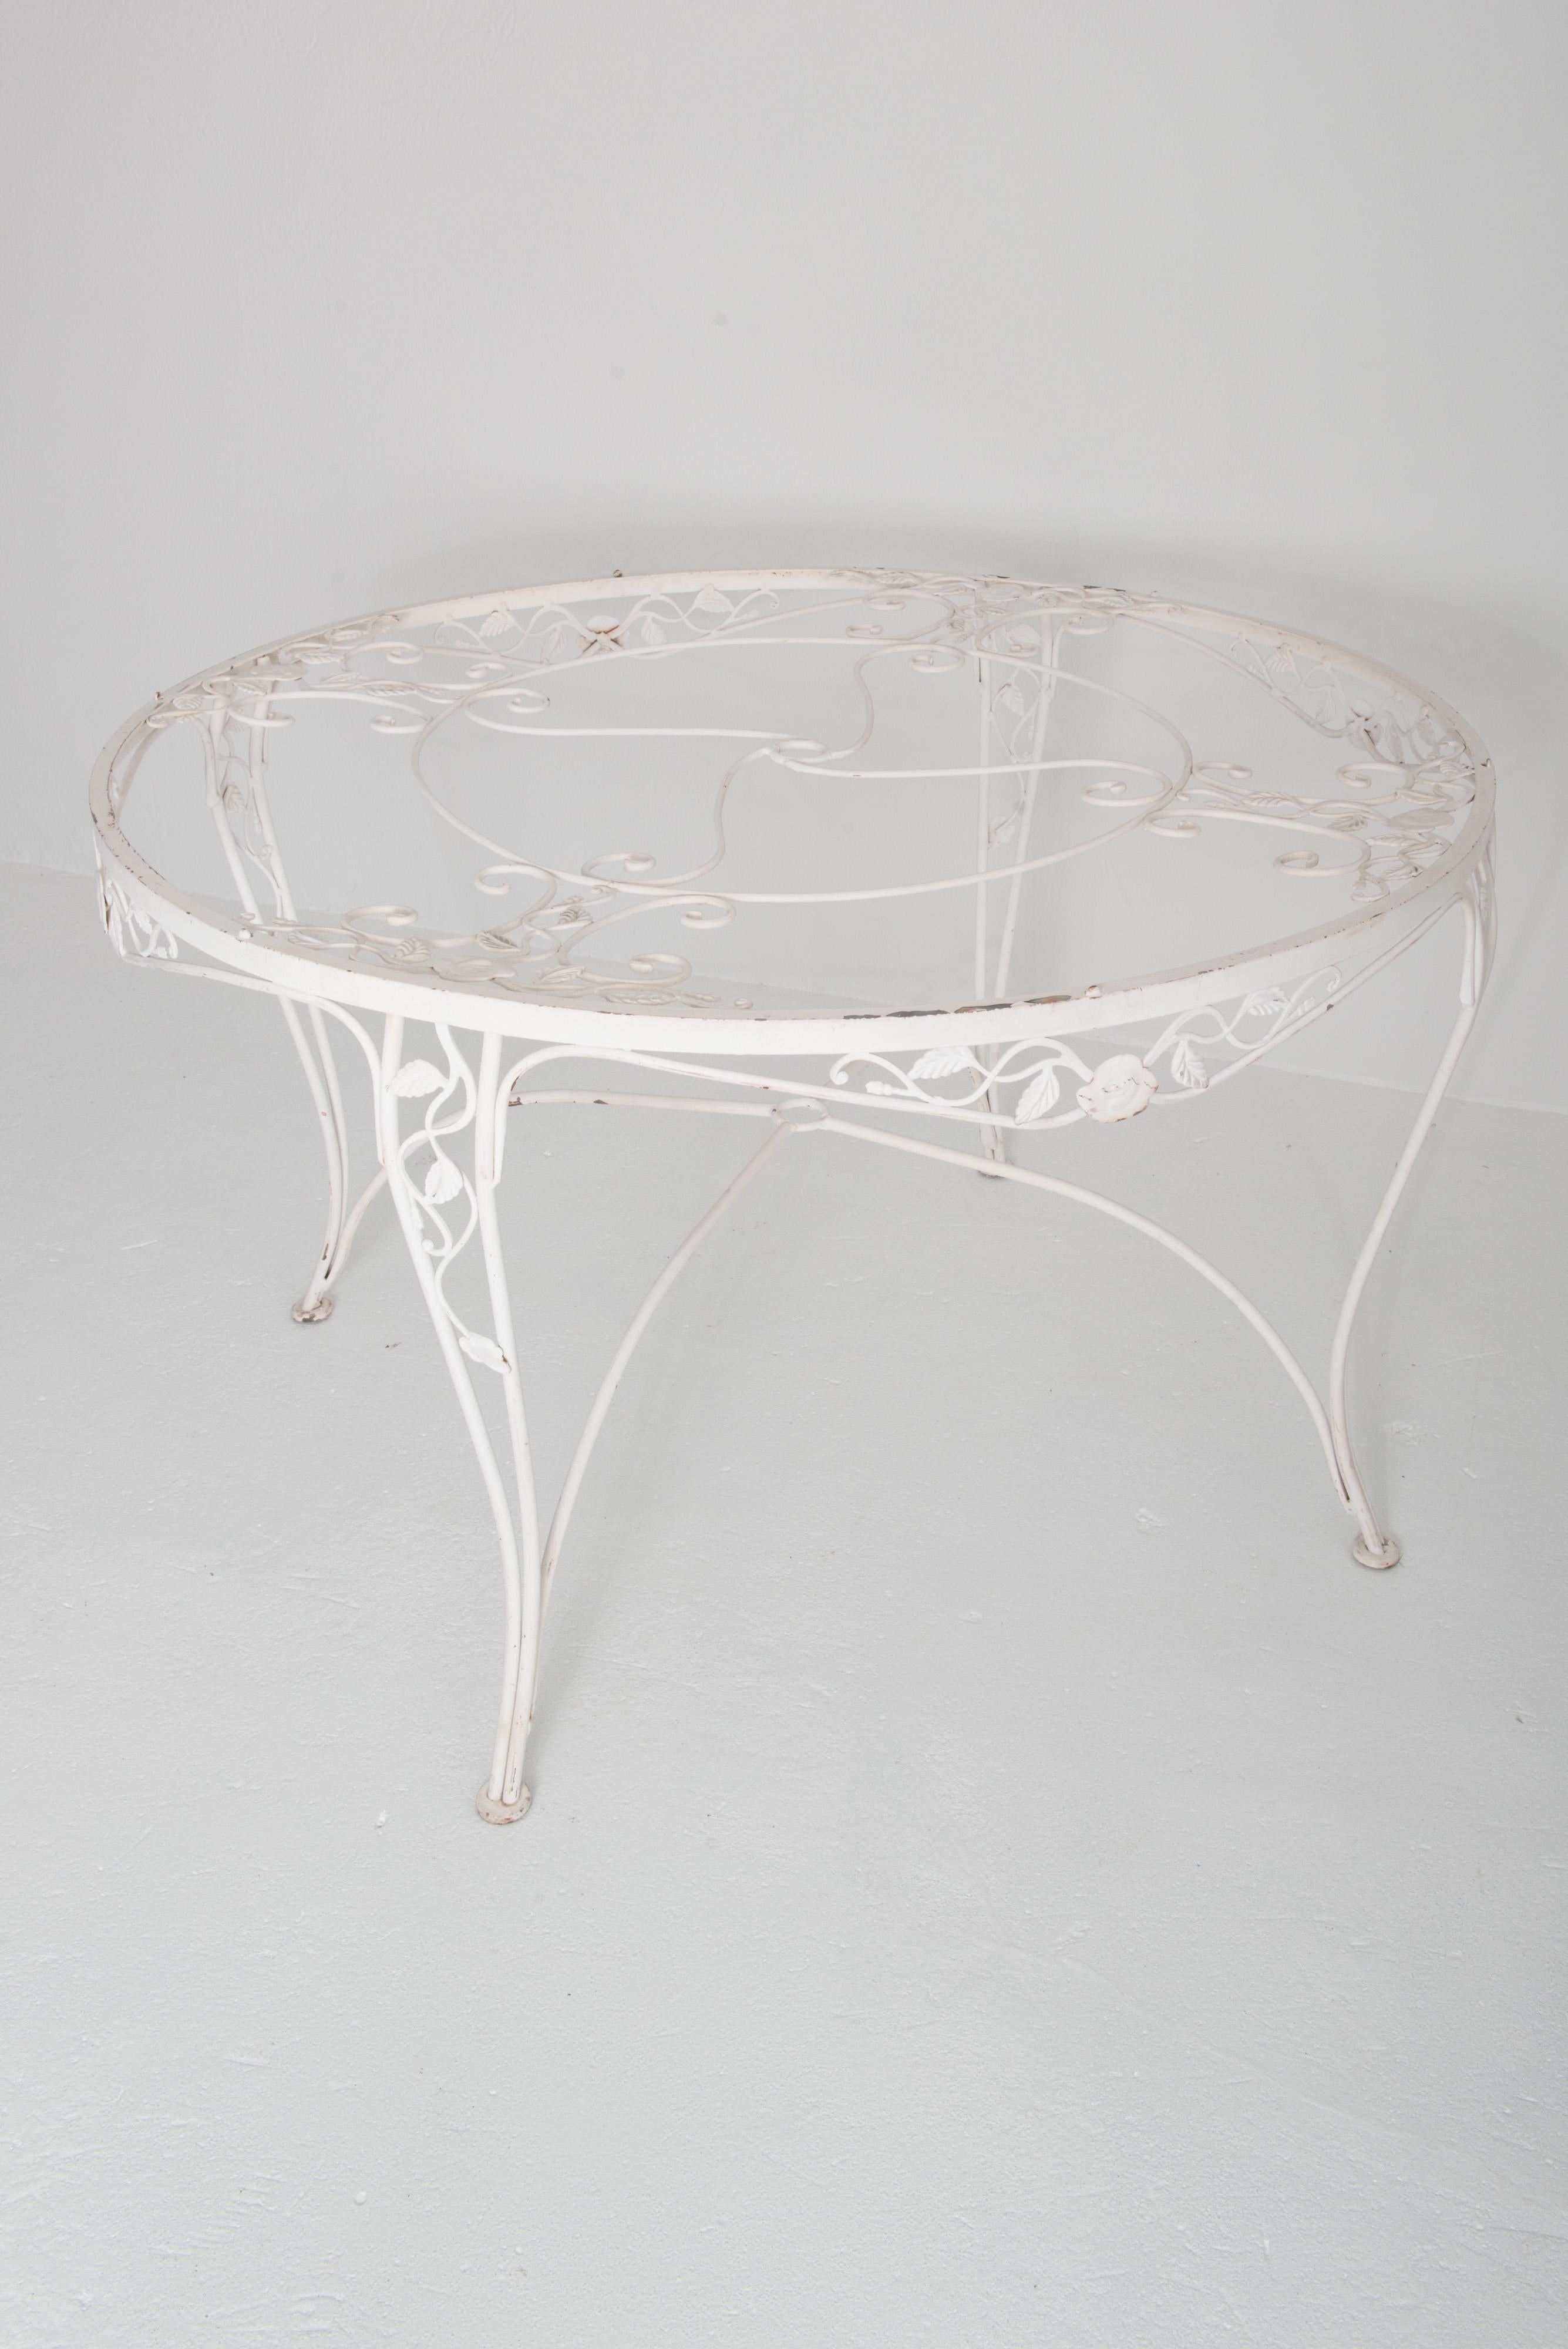 Glass Woodard Chantilly Rose Wrought Iron Coffee Table For Sale